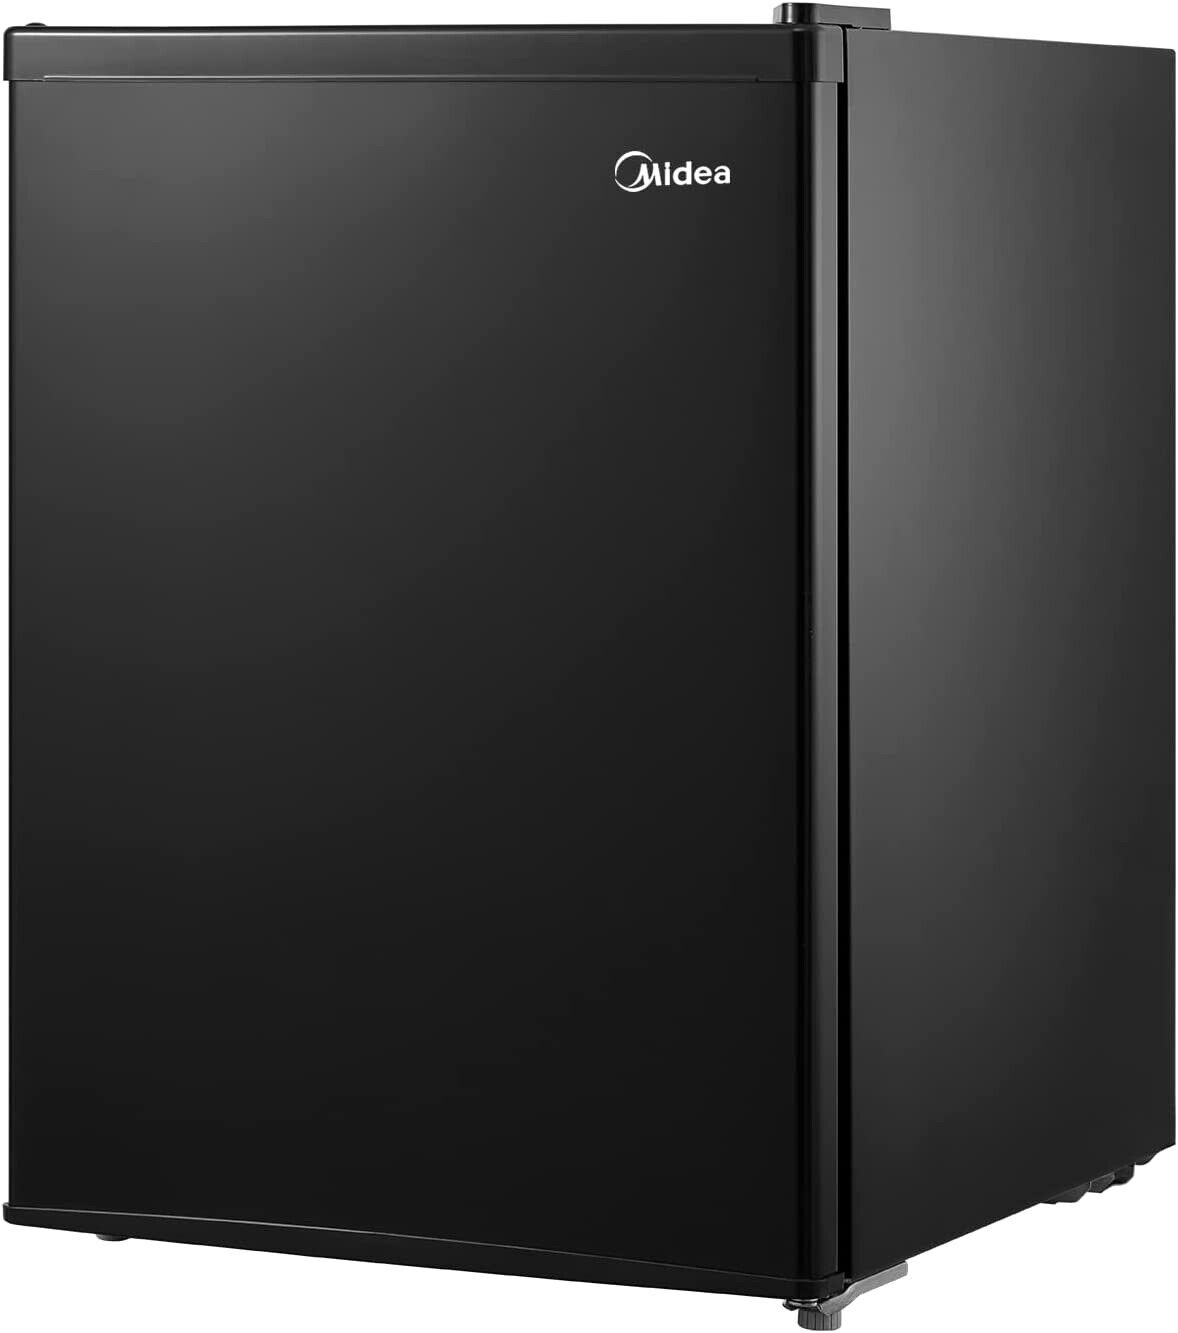 Midea Refrigerator, 2.4 Cubic Feet, Black Mini - Perfect for Dorm and at Home 